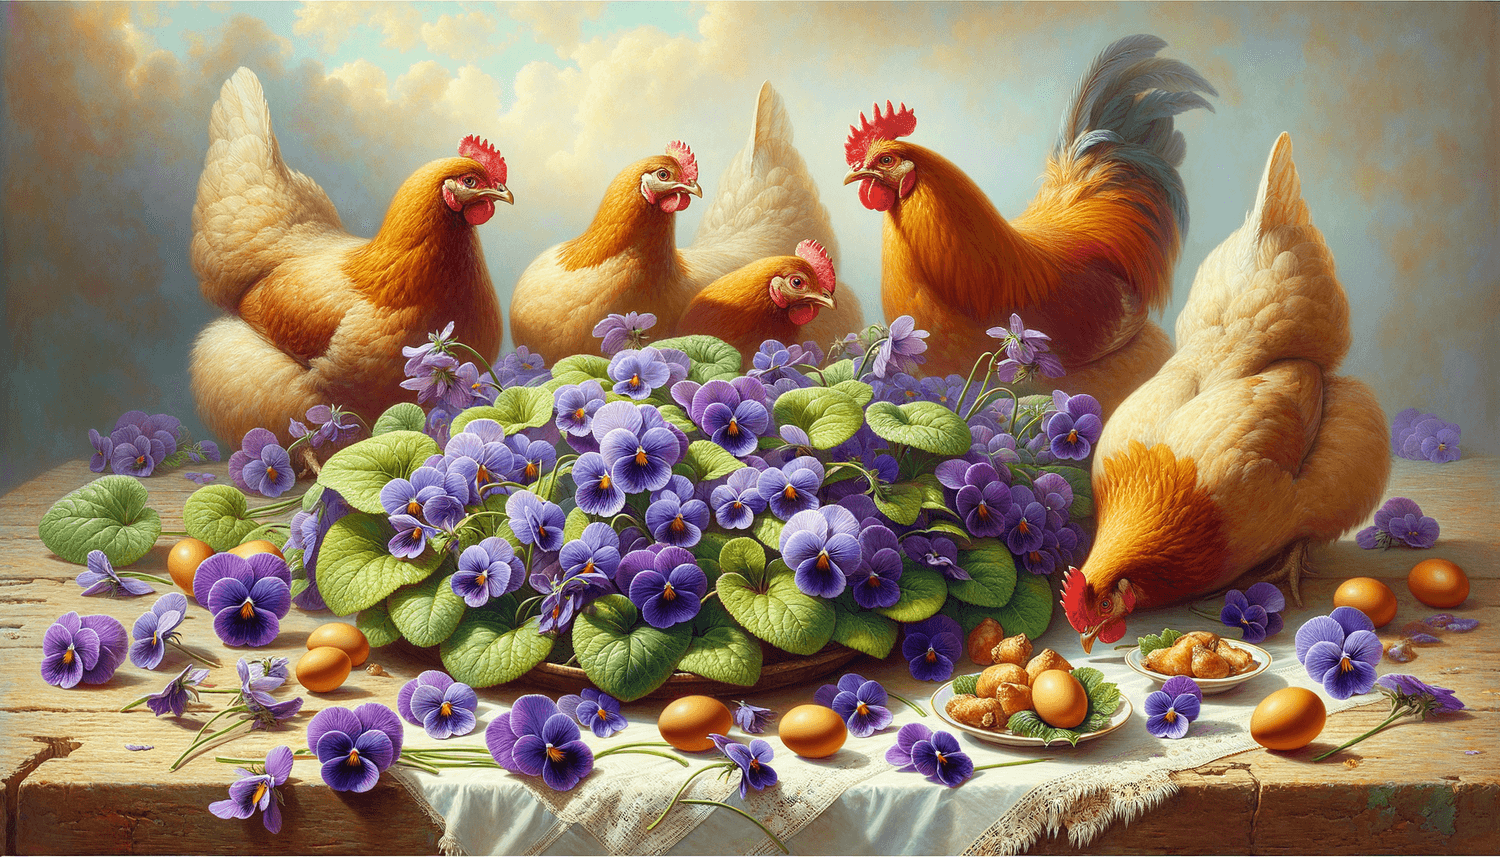 Can Chickens Eat Violets?